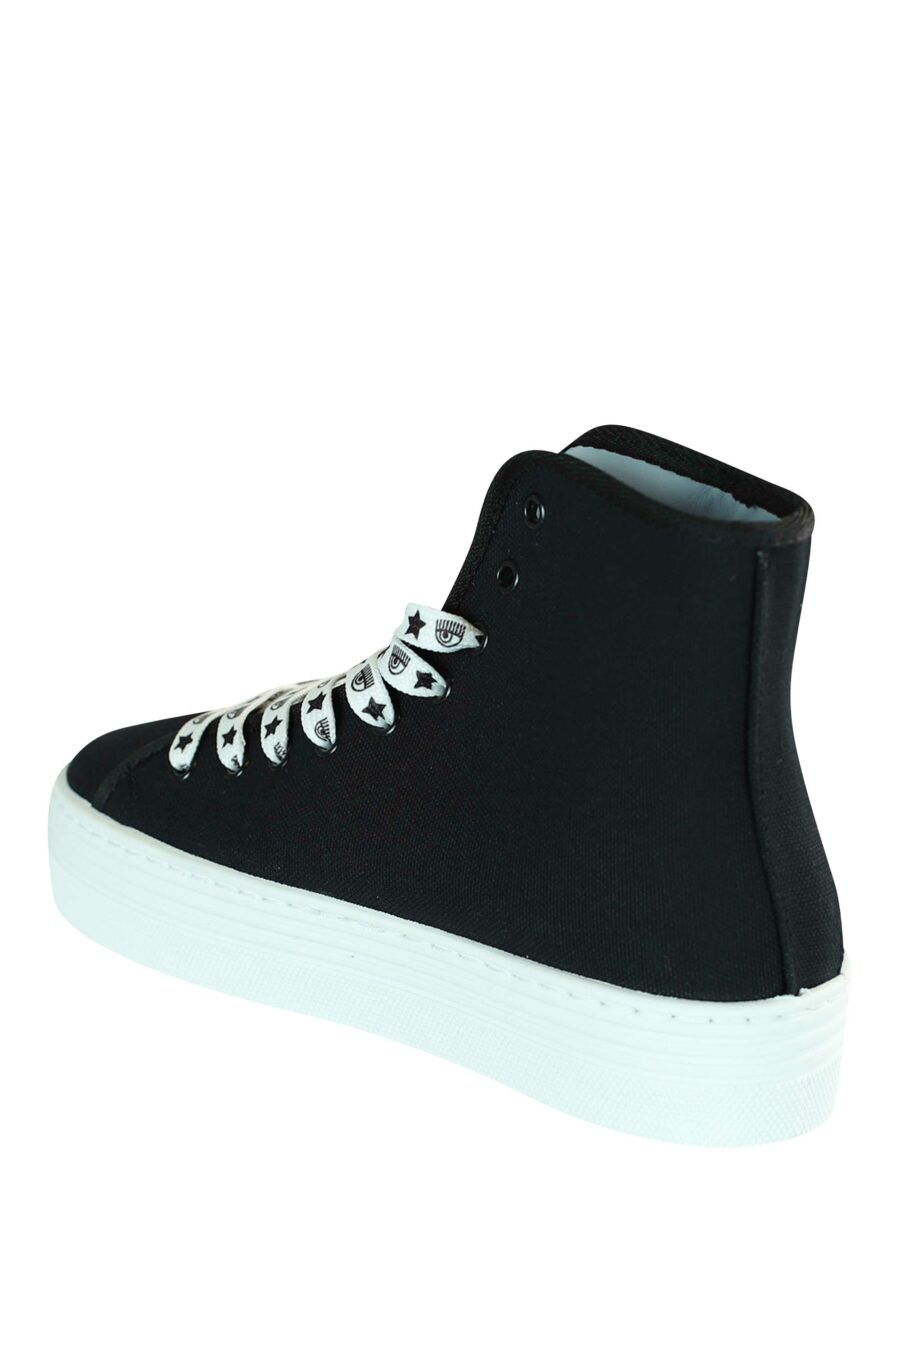 Black high top trainers with platform and embroidered star and eye logo - 8059388229093 4